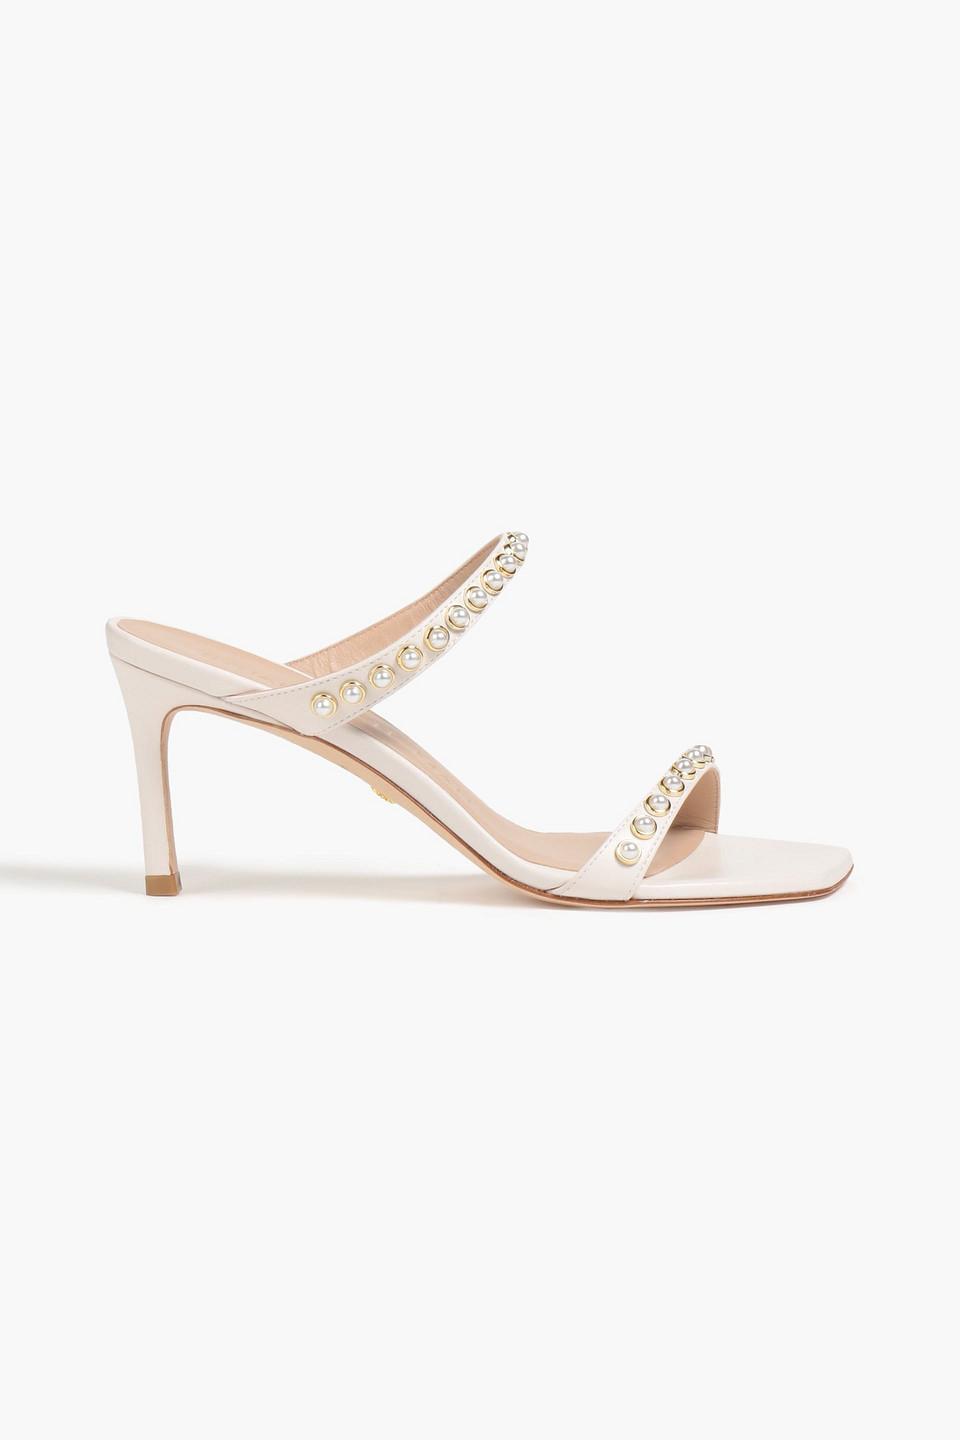 Stuart Weitzman Aleena Faux Pearl-embellished Leather Mules in White | Lyst